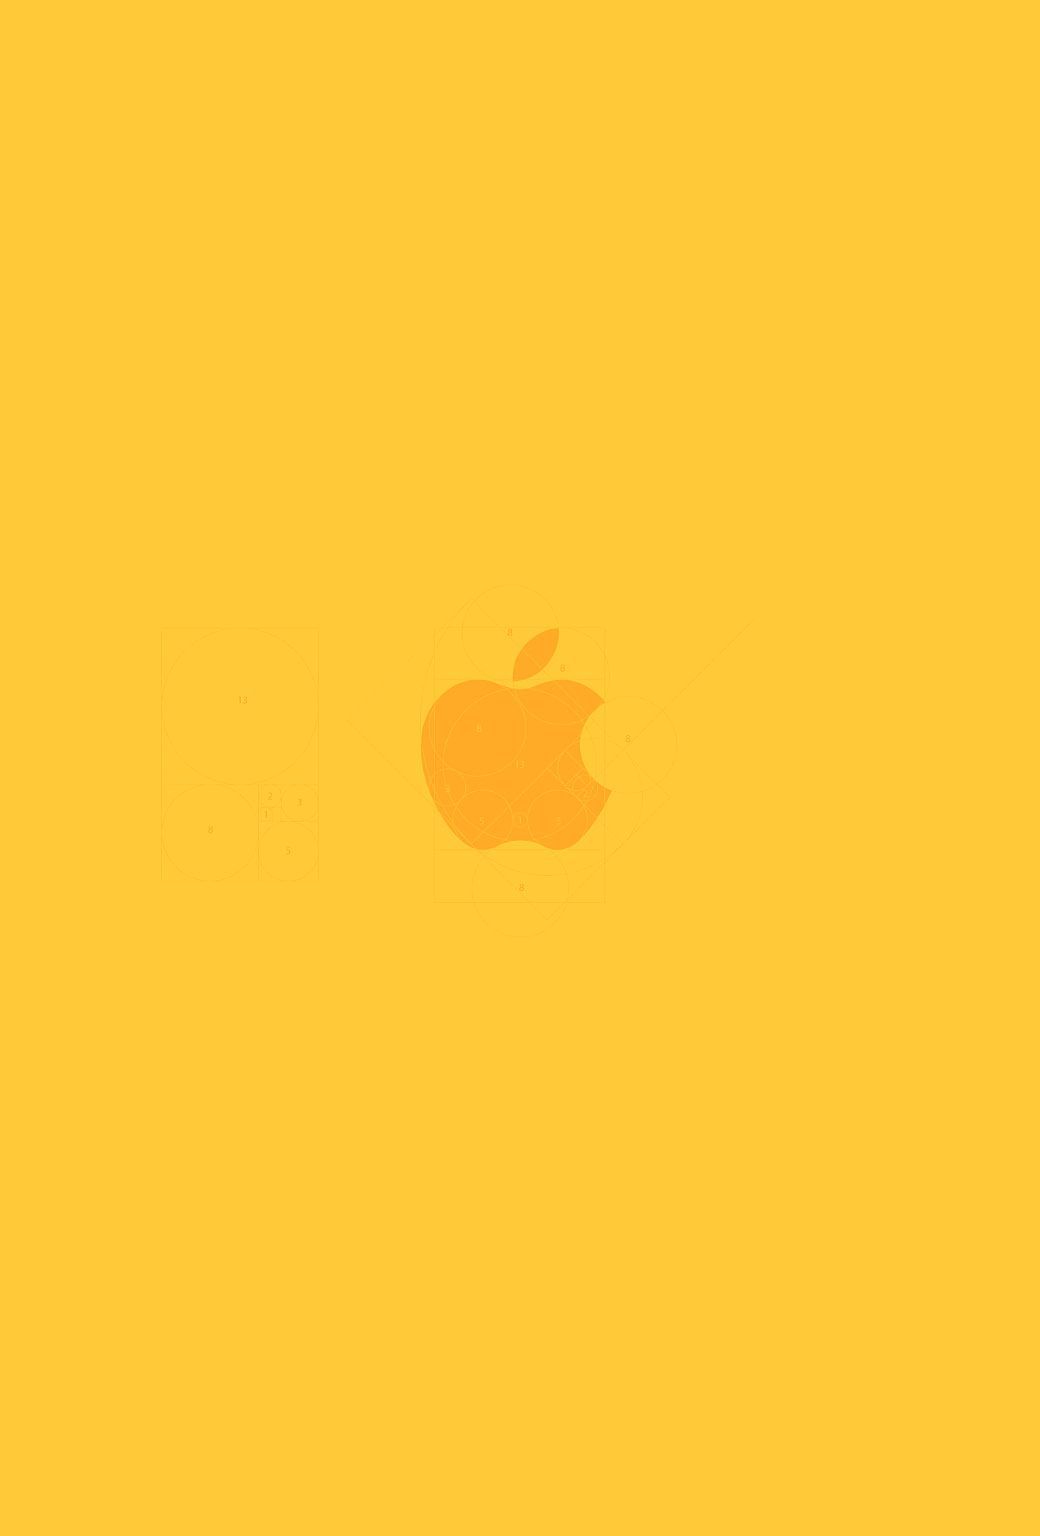 1040x1536 yellow wallpaper for iphone - Bing image. iPhone wallpaper on W.....